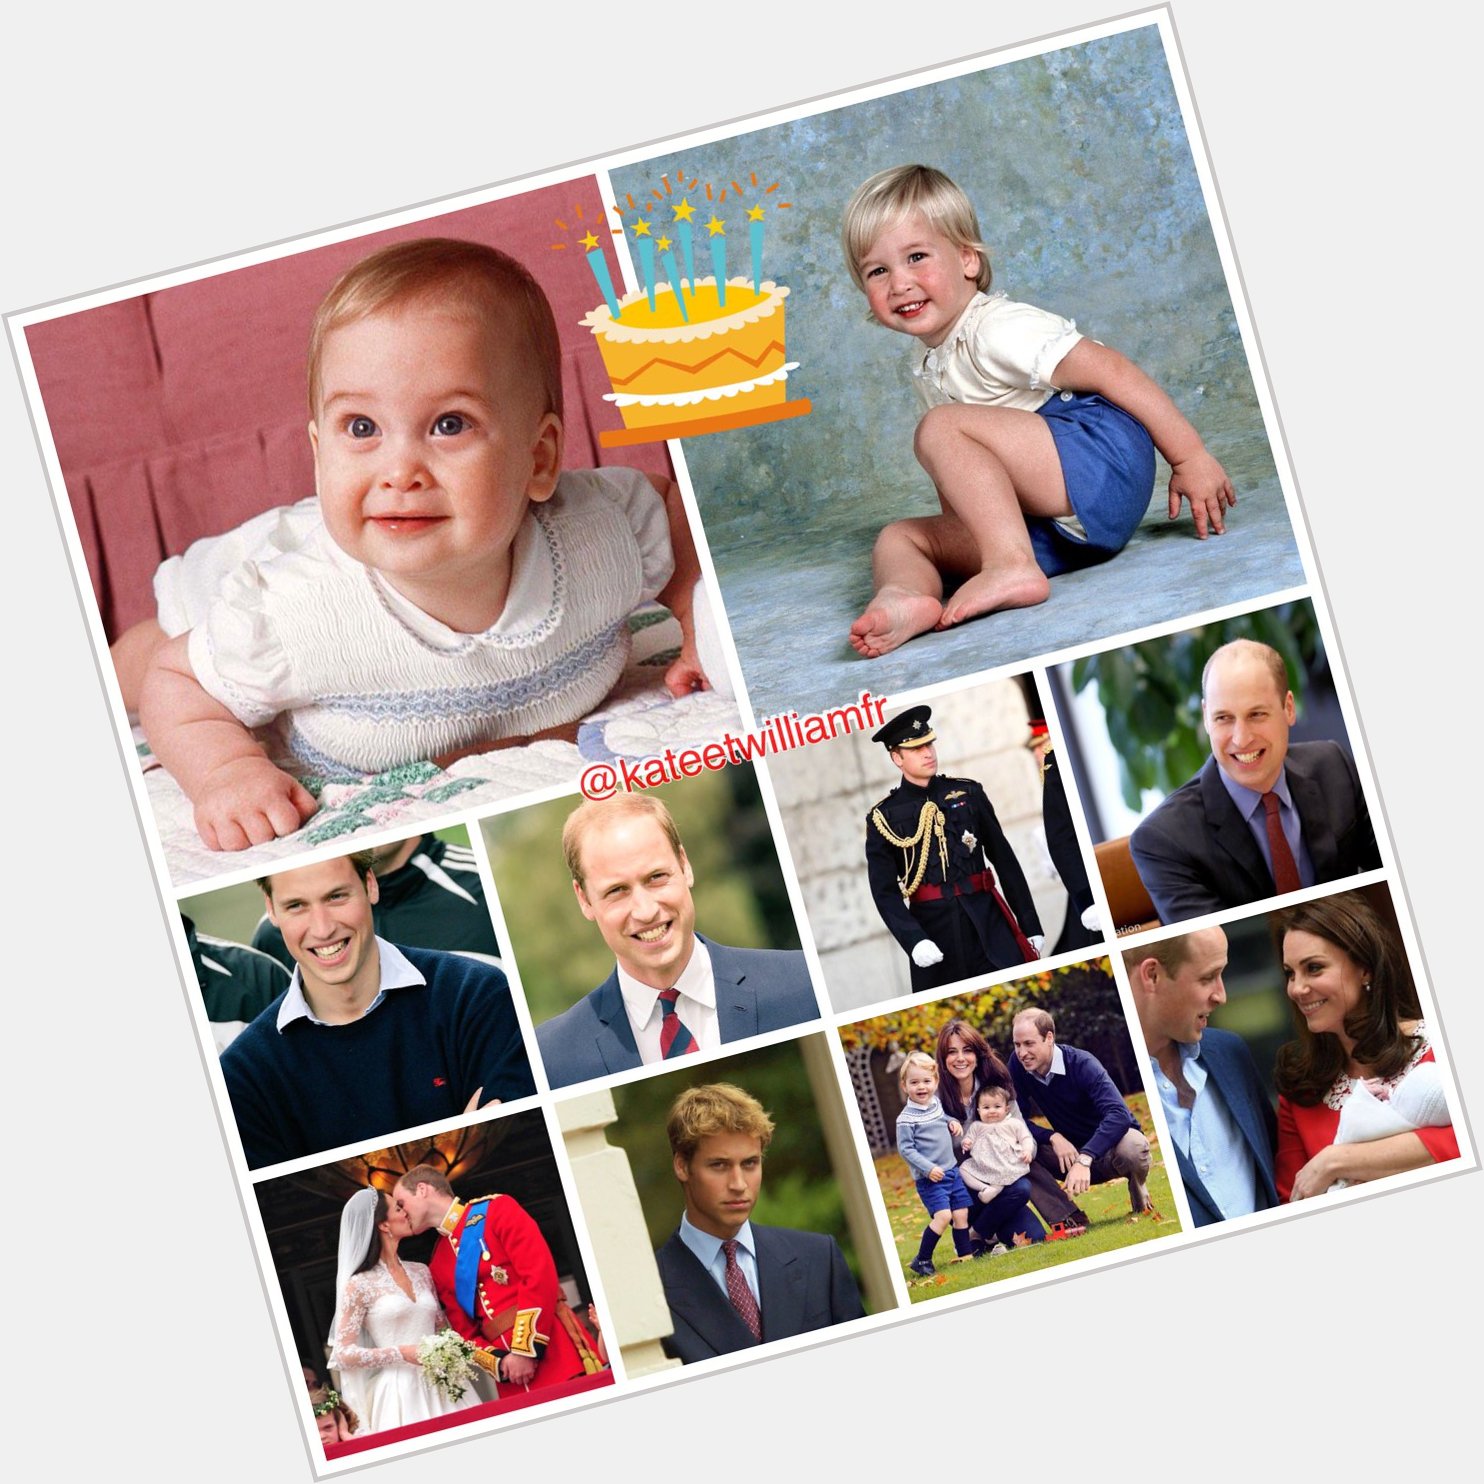 Happy birthday to HRH Prince William The Duke of Cambridge! Enjoy a very fine and happiest day 